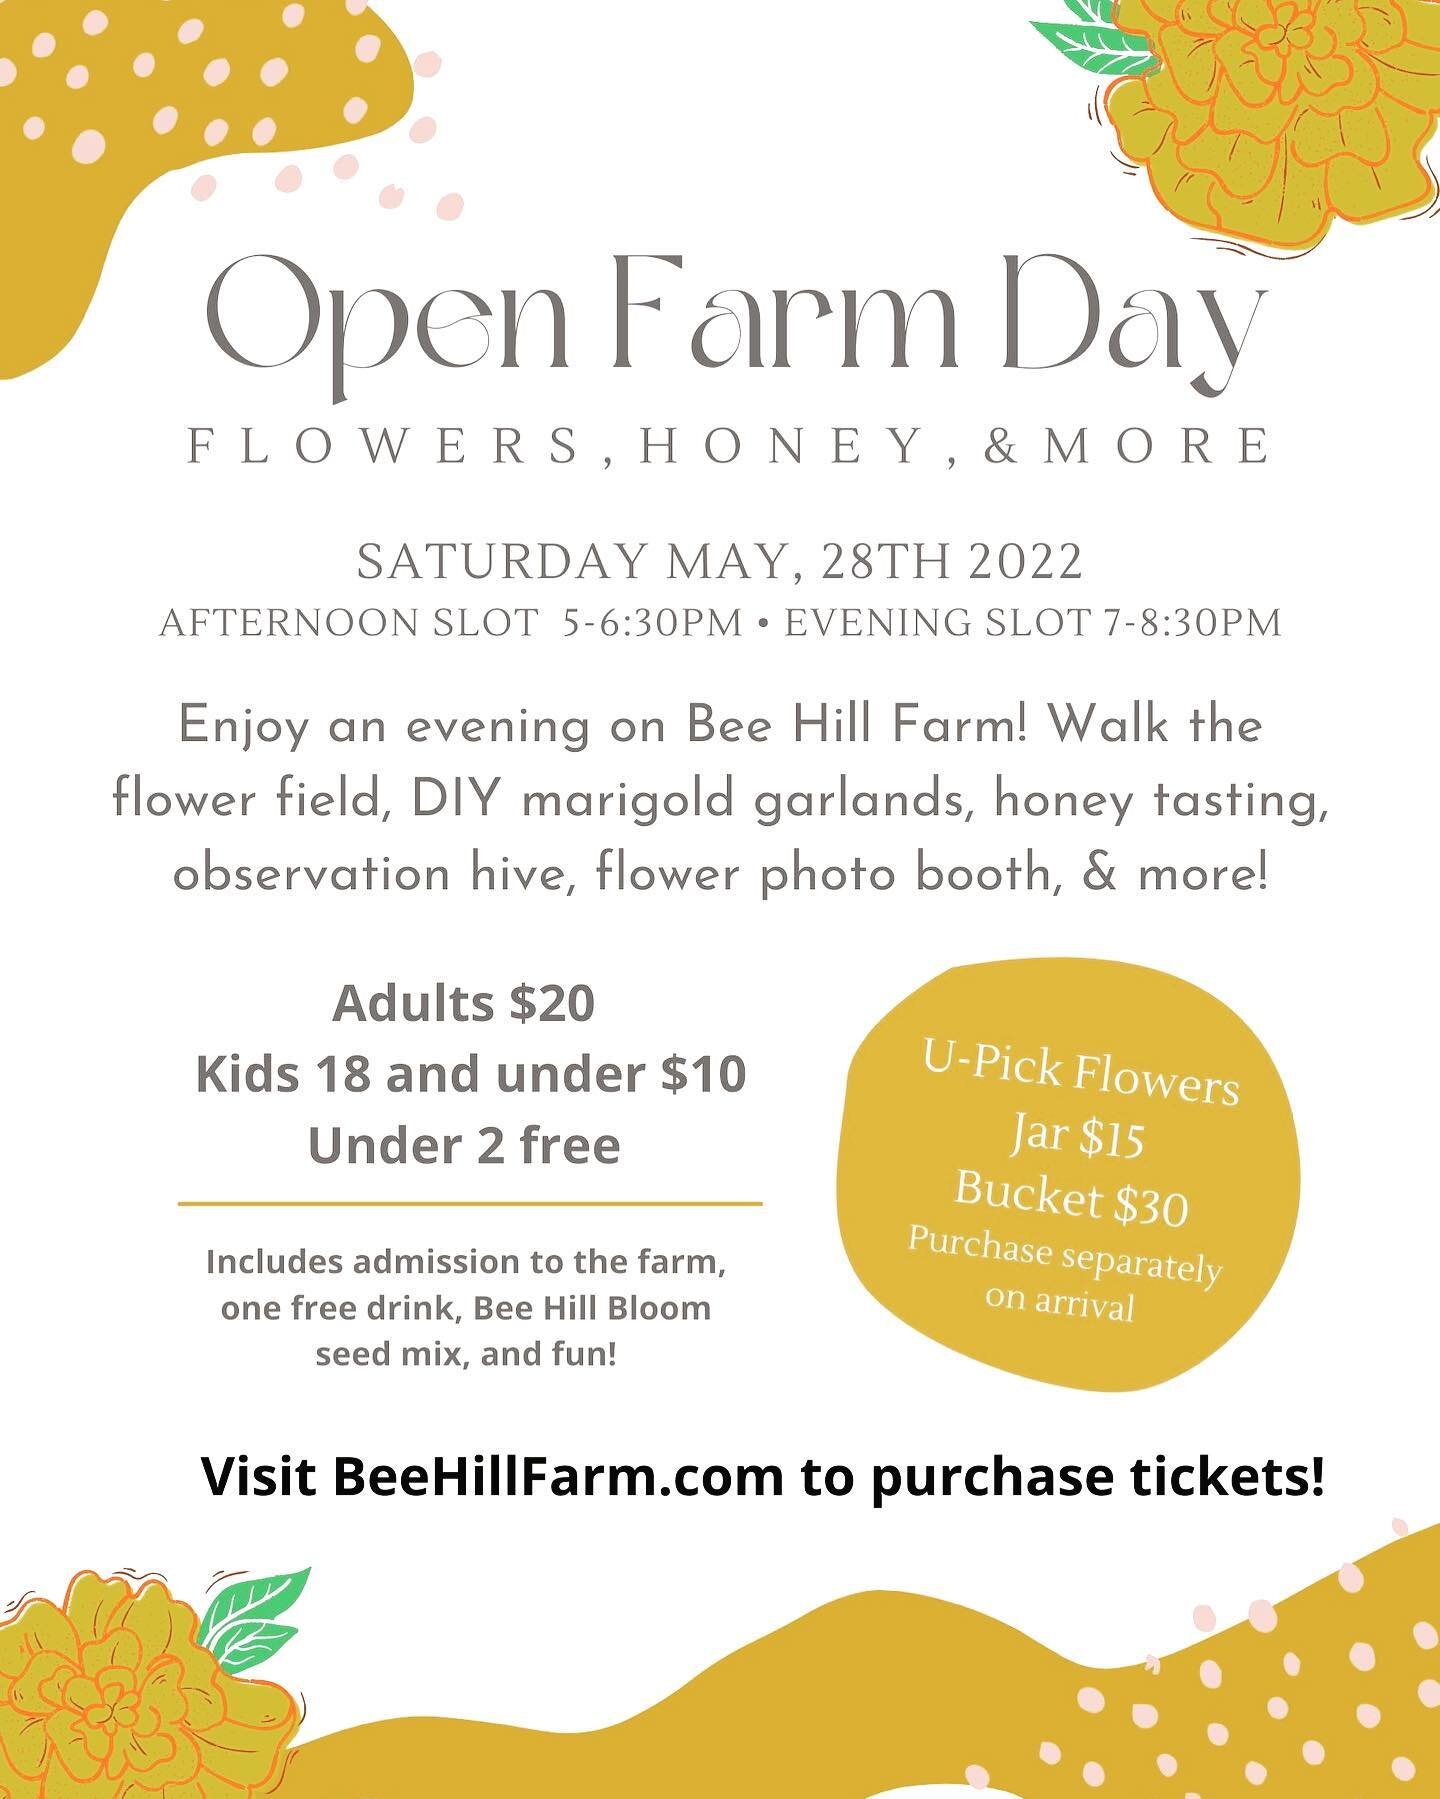 🌸OPEN FARM DAY🌸 

Yeah that&rsquo;s right, we&rsquo;re opening the gate and letting y&rsquo;all come pick your own flowers! We&rsquo;ve been working hard this season and it&rsquo;s finally time to call it quits, but we&rsquo;re not going out withou